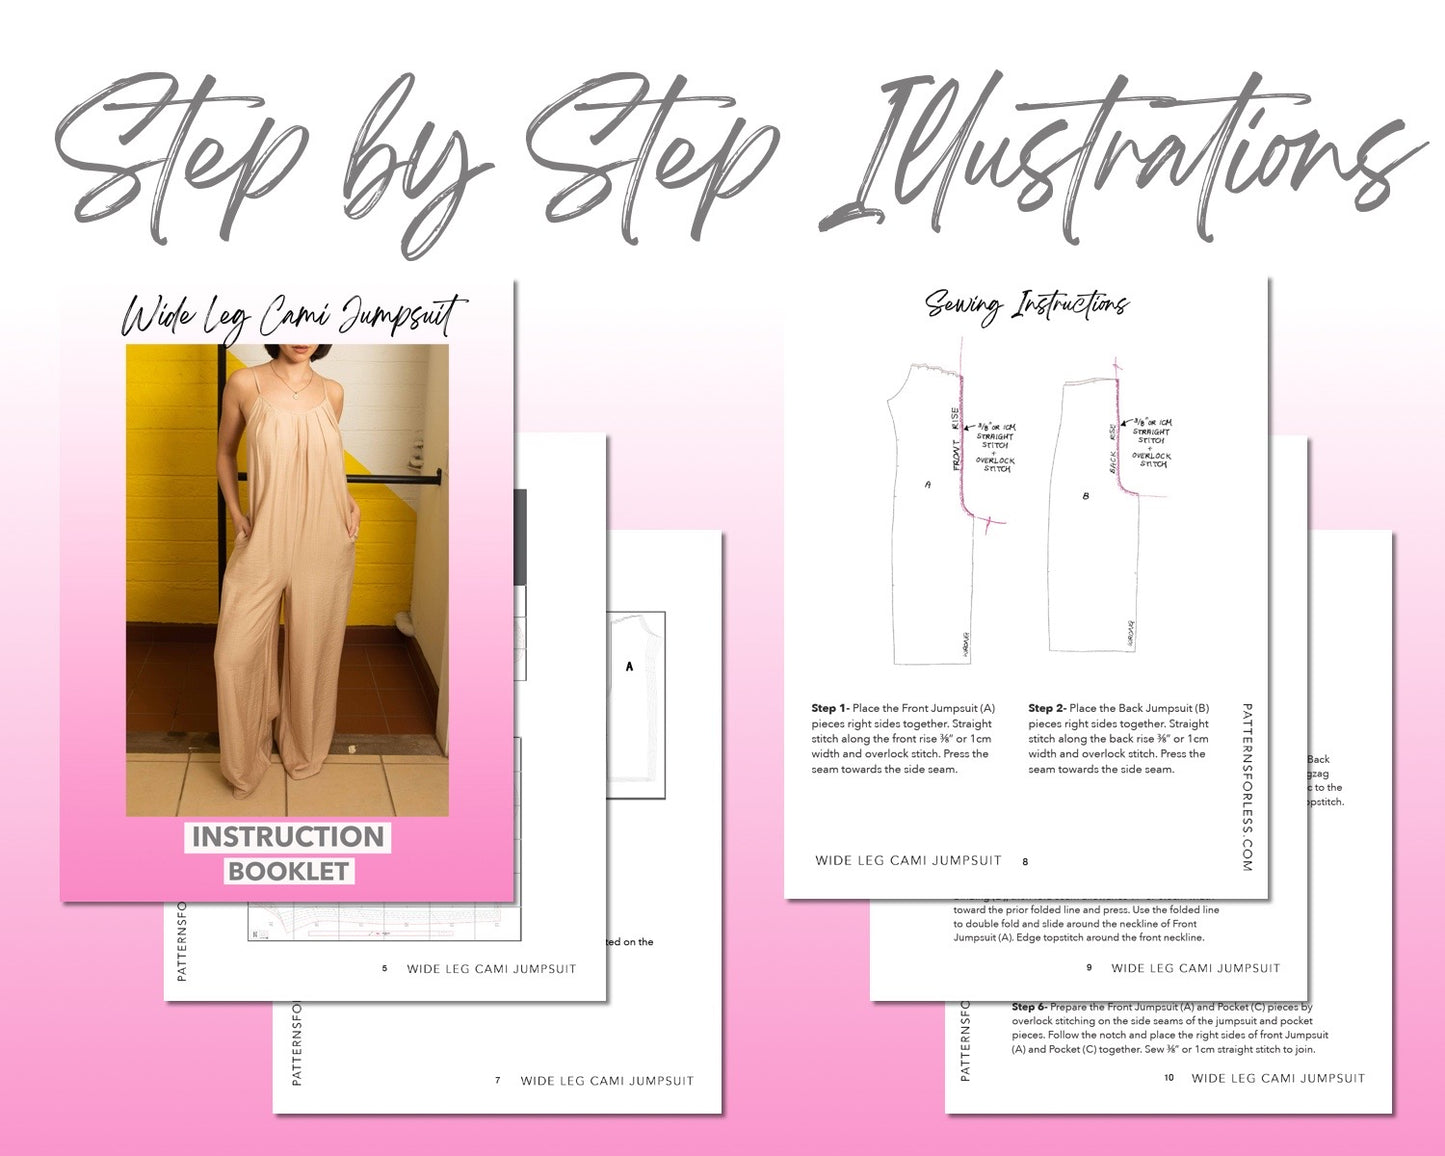 Wide Leg Cami Jumpsuit sewing pattern step by step illustrations.